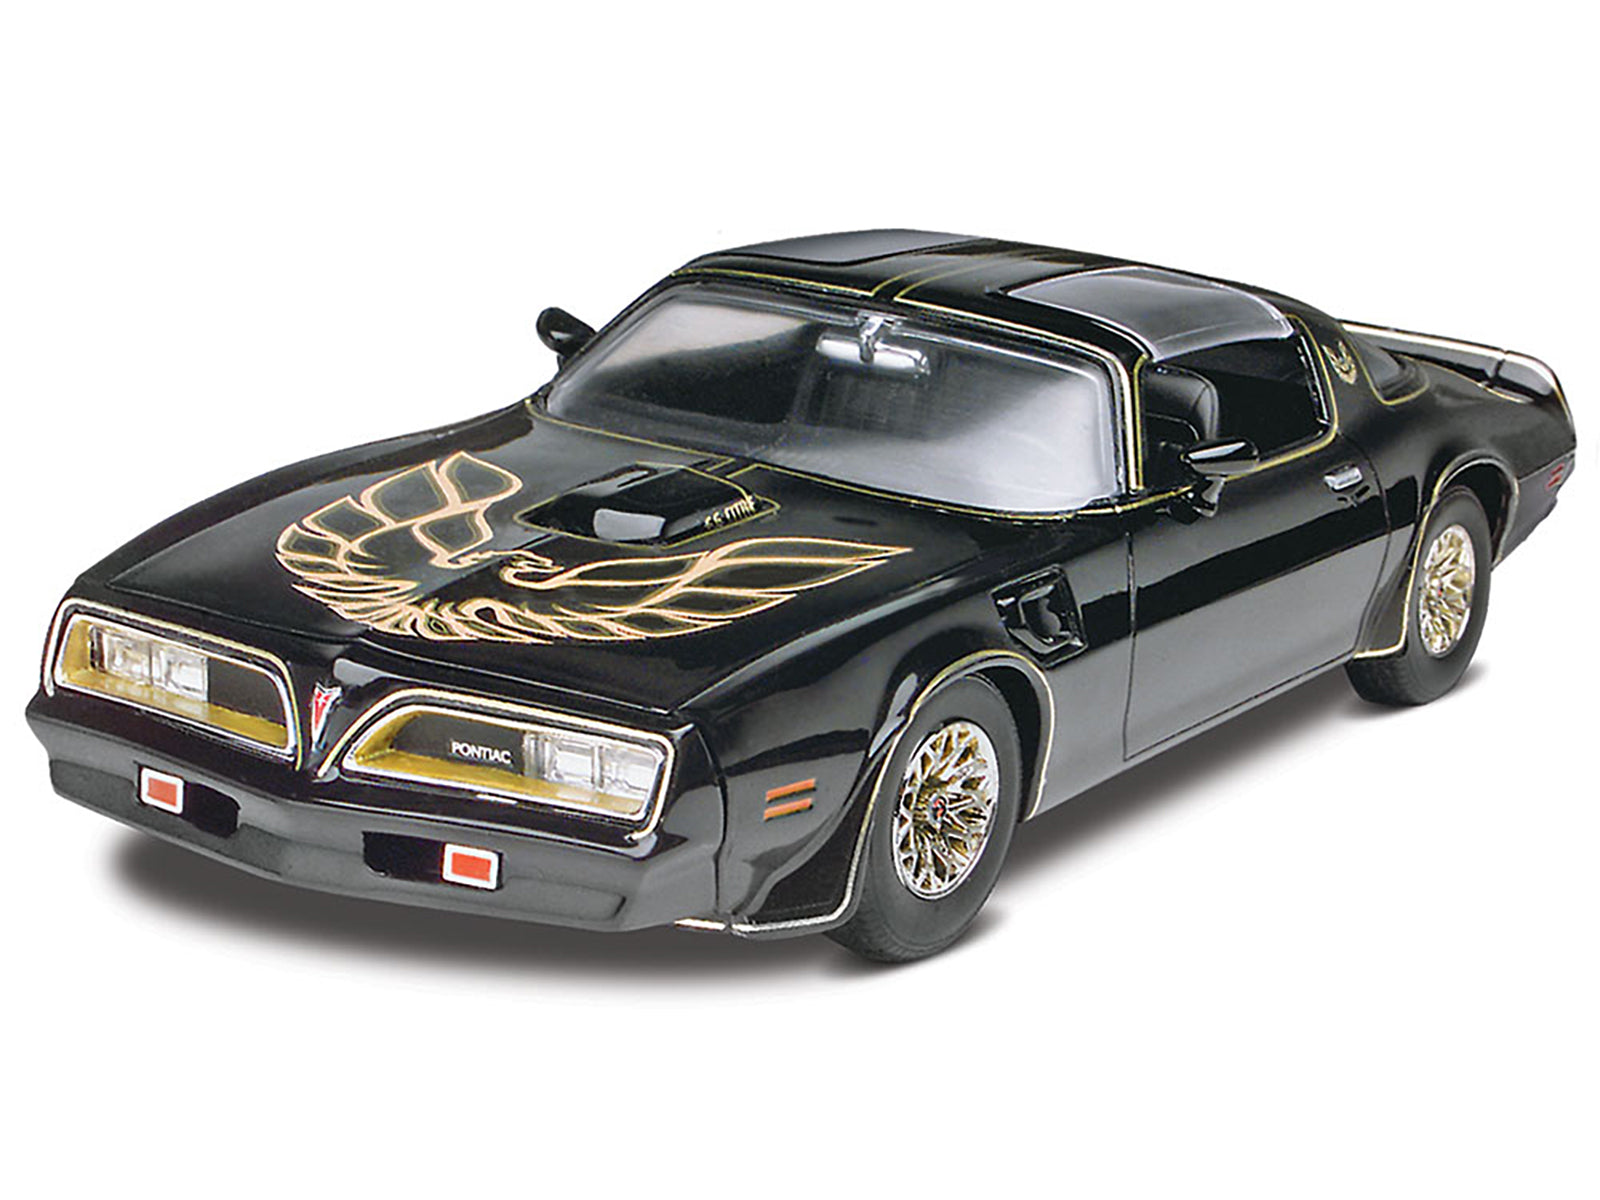 Level 4 Model Kit 1977 Pontiac Firebird "Smokey and the Bandit" (1977) Movie 1/25 Scale Model Car by Revell